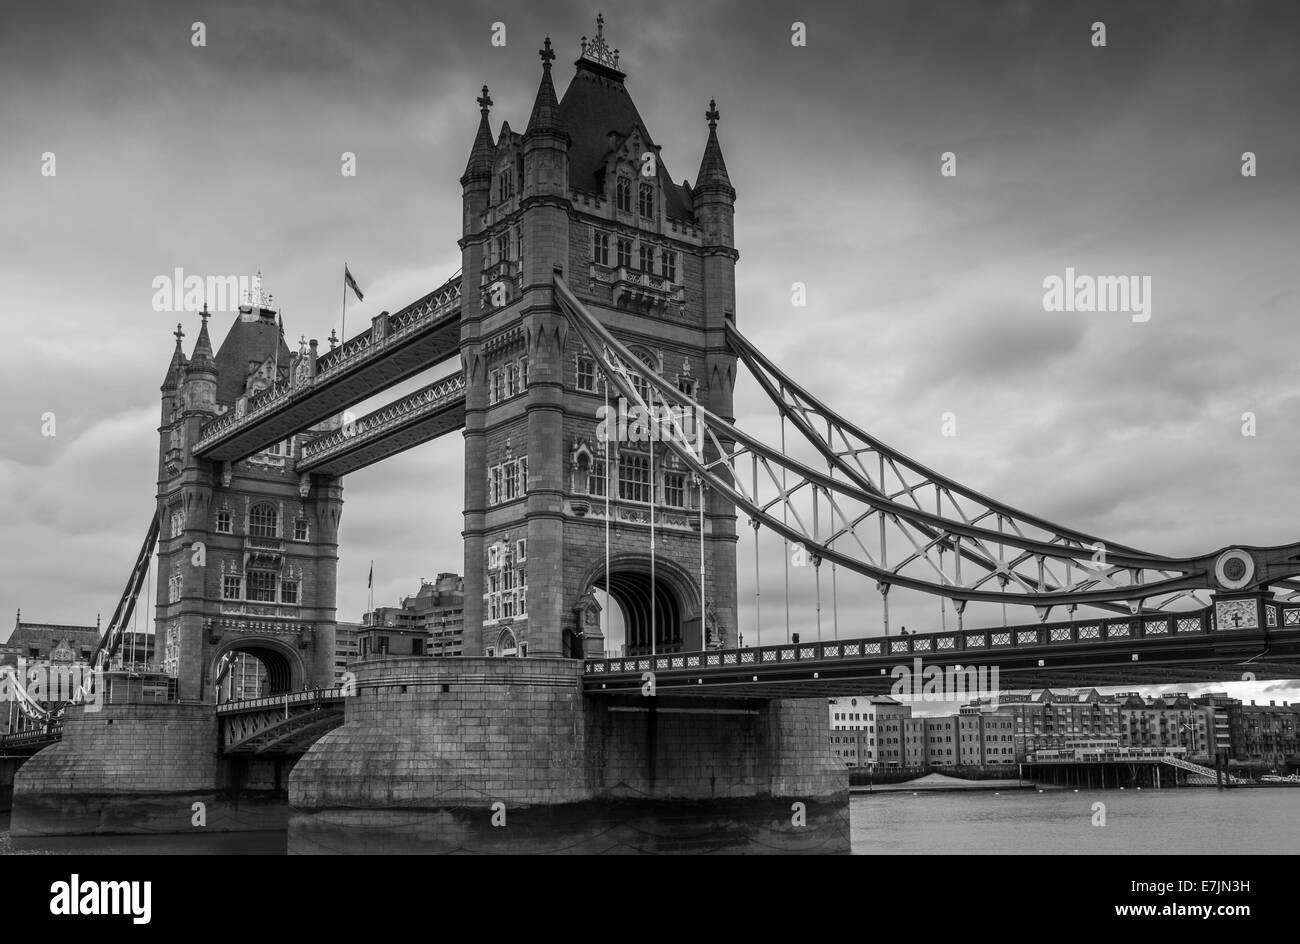 Dramatic black and white, wide angle view of Tower Bridge on an ...